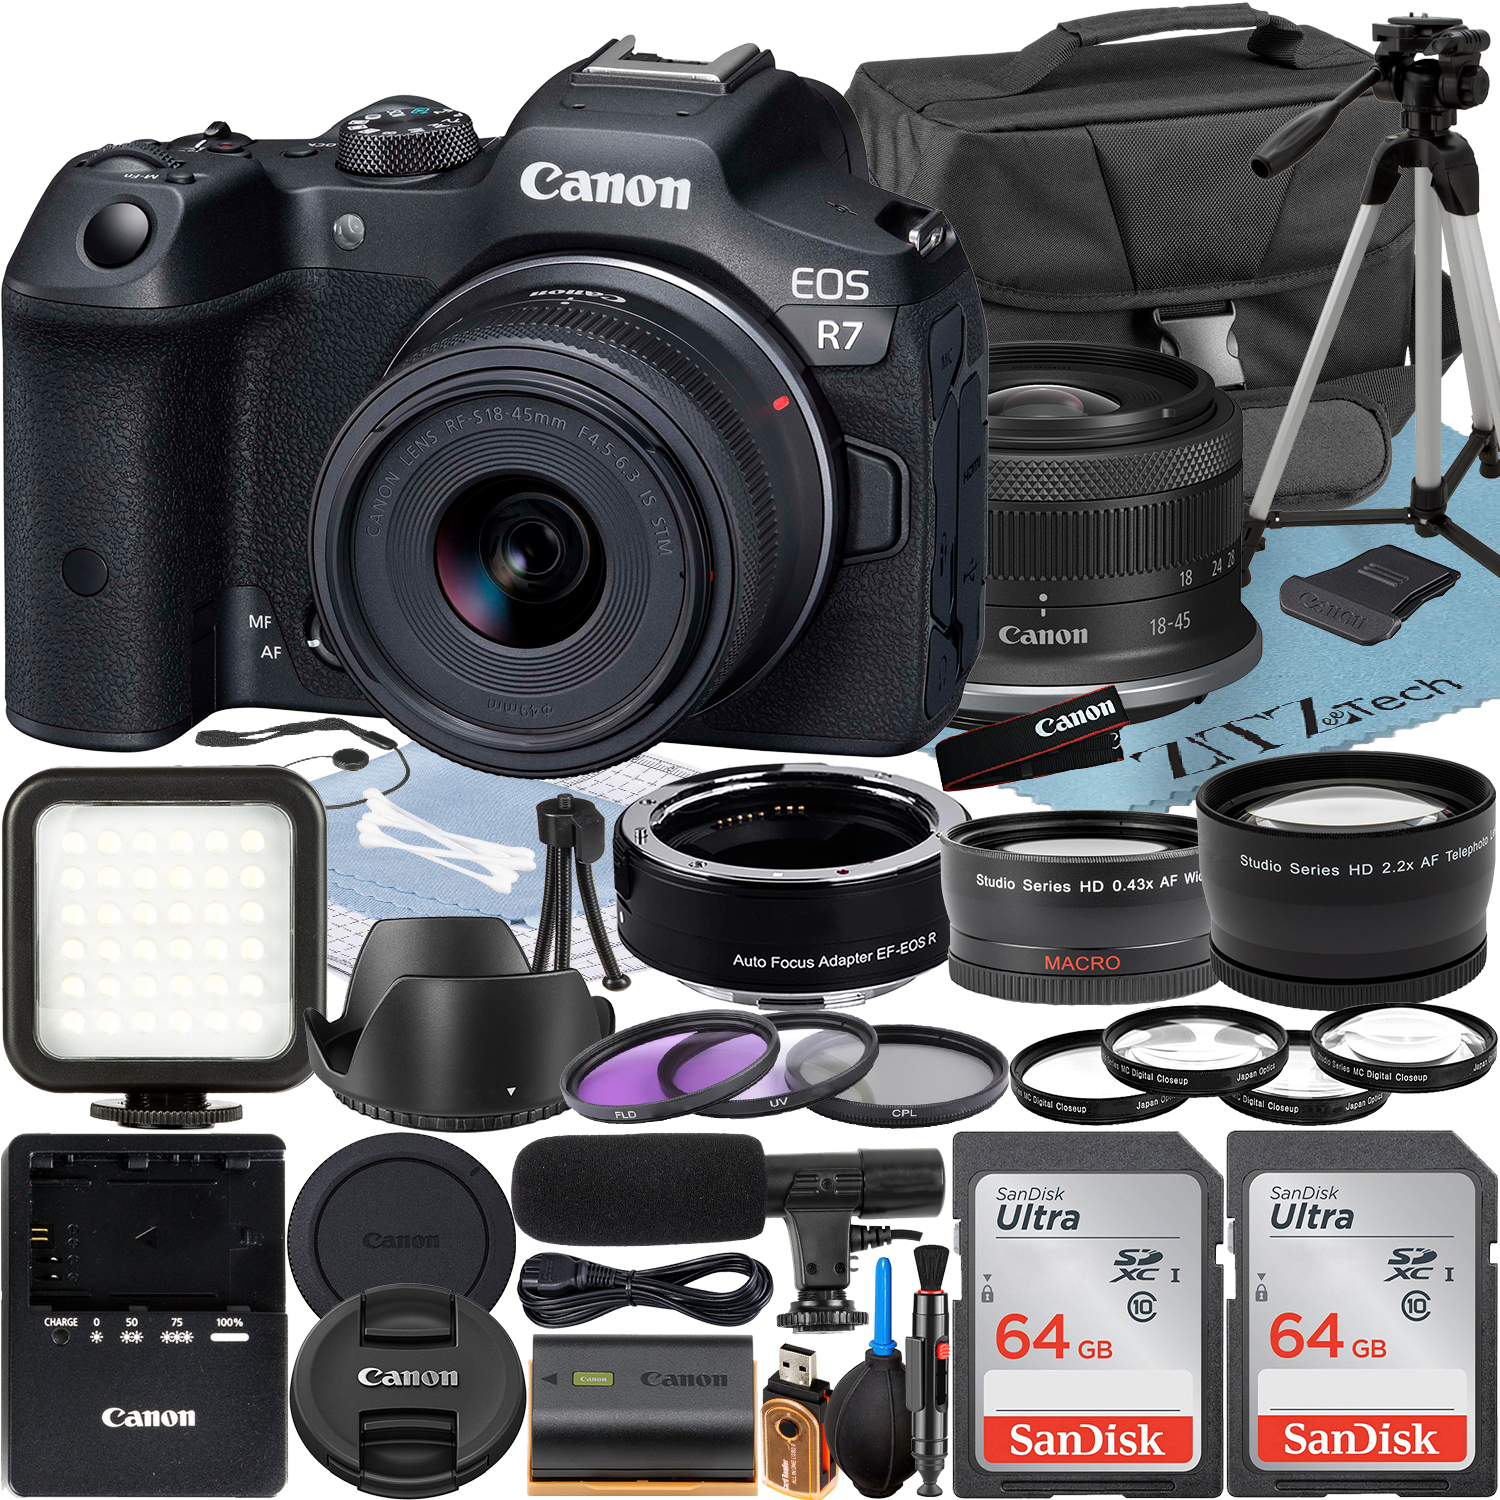 Canon EOS R7 Mirrorless Camera with RF-S 18-45mm Lens + Mount Adapter + 2 Pack SanDisk 64GB Memory Card + Case + ZeeTech Accessory